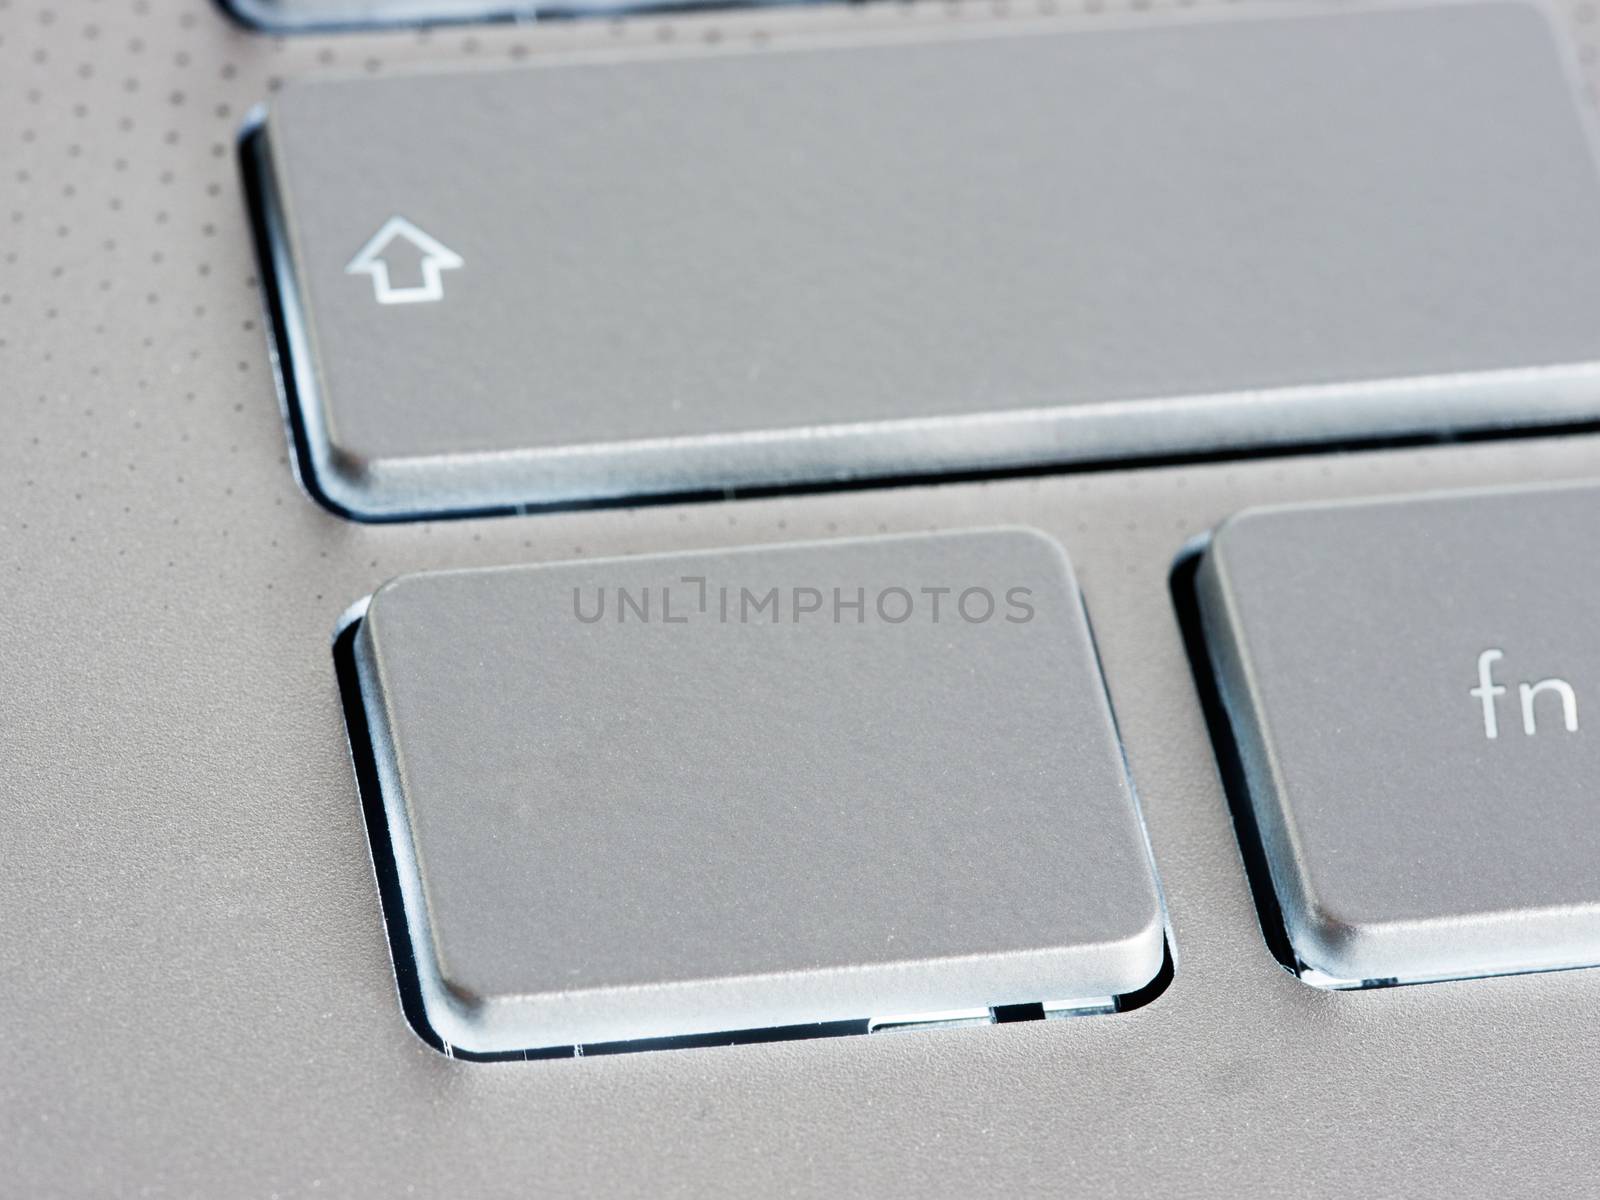 Blank button on keyboard close-up by fascinadora